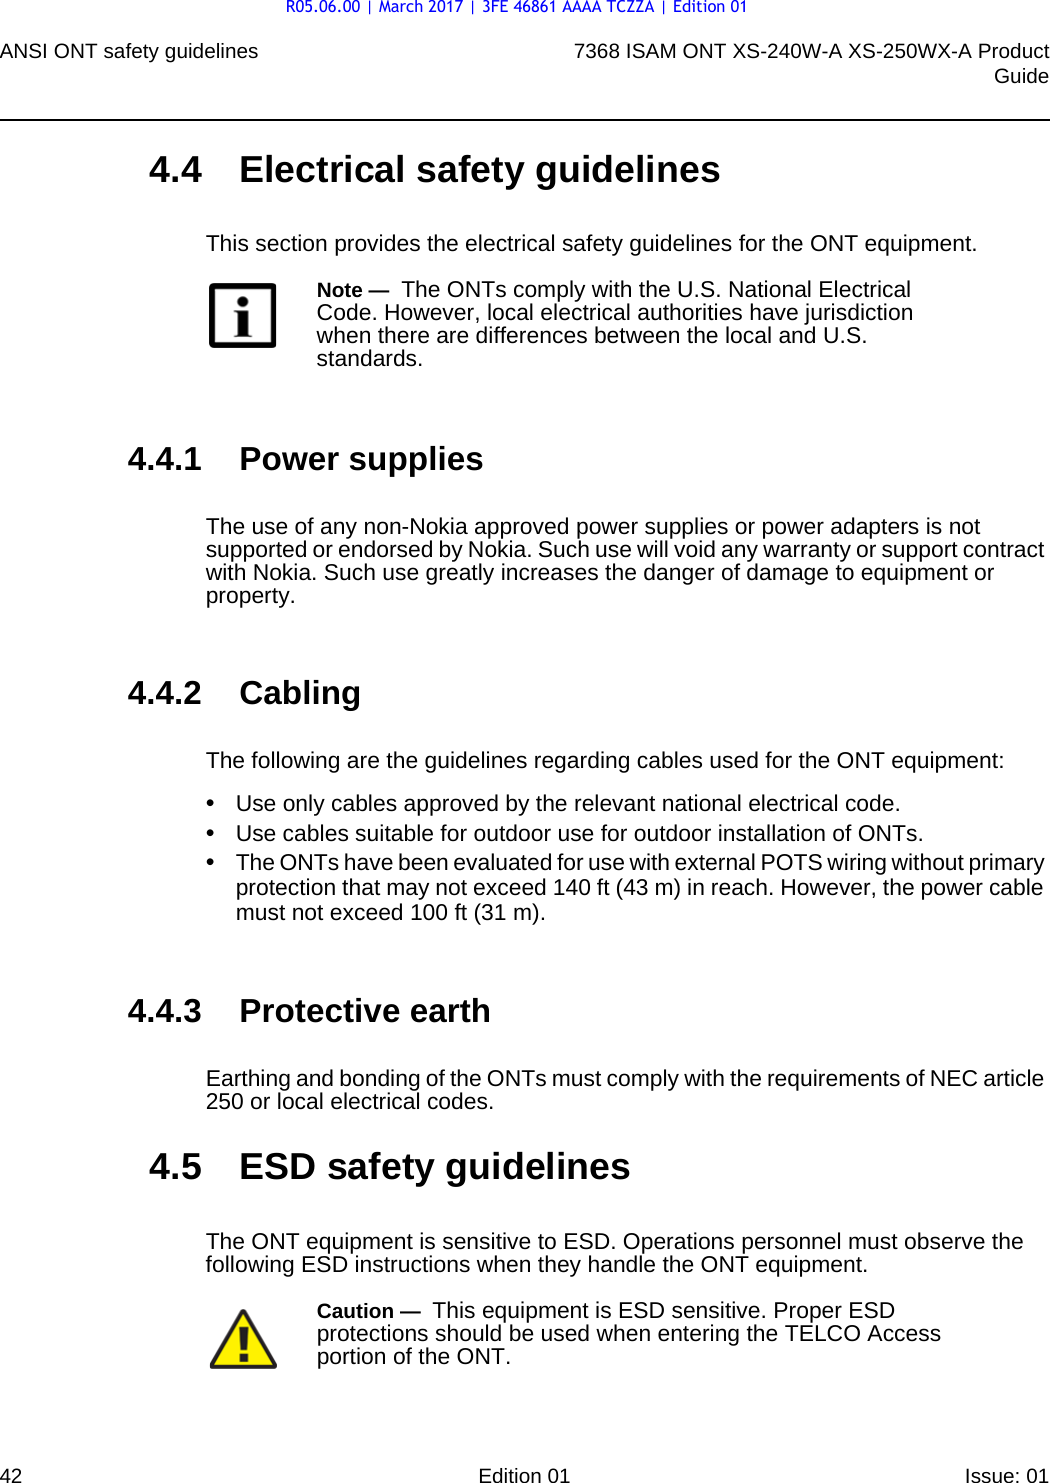 ANSI ONT safety guidelines427368 ISAM ONT XS-240W-A XS-250WX-A ProductGuideEdition 01 Issue: 01 4.4 Electrical safety guidelinesThis section provides the electrical safety guidelines for the ONT equipment.4.4.1 Power suppliesThe use of any non-Nokia approved power supplies or power adapters is not supported or endorsed by Nokia. Such use will void any warranty or support contract with Nokia. Such use greatly increases the danger of damage to equipment or property.4.4.2 CablingThe following are the guidelines regarding cables used for the ONT equipment:•Use only cables approved by the relevant national electrical code.•Use cables suitable for outdoor use for outdoor installation of ONTs.•The ONTs have been evaluated for use with external POTS wiring without primary protection that may not exceed 140 ft (43 m) in reach. However, the power cable must not exceed 100 ft (31 m).4.4.3 Protective earthEarthing and bonding of the ONTs must comply with the requirements of NEC article 250 or local electrical codes.4.5 ESD safety guidelinesThe ONT equipment is sensitive to ESD. Operations personnel must observe the following ESD instructions when they handle the ONT equipment. Note —  The ONTs comply with the U.S. National Electrical Code. However, local electrical authorities have jurisdiction when there are differences between the local and U.S. standards.Caution —  This equipment is ESD sensitive. Proper ESD protections should be used when entering the TELCO Access portion of the ONT.R05.06.00 | March 2017 | 3FE 46861 AAAA TCZZA | Edition 01